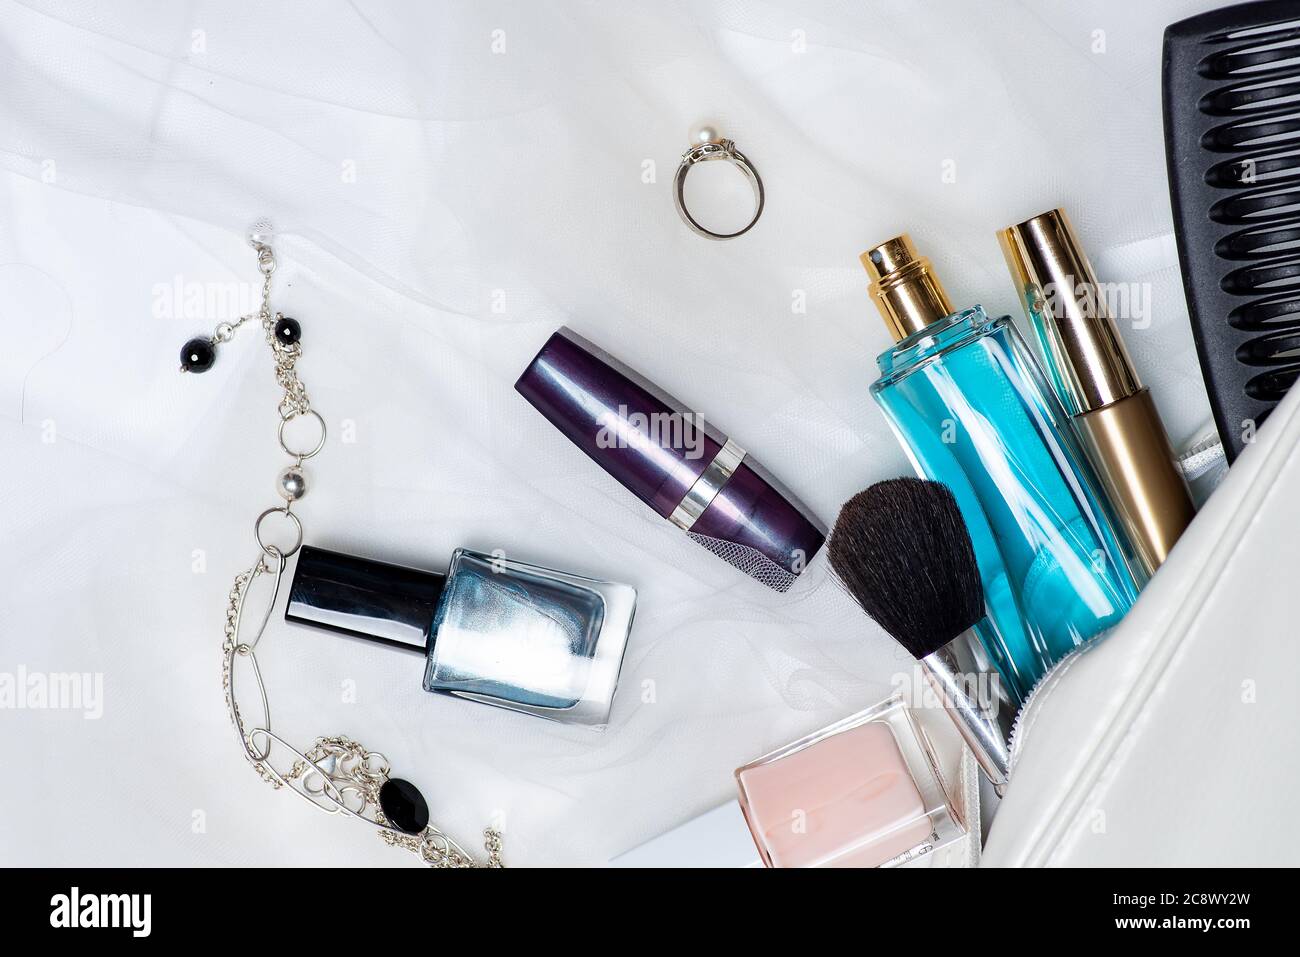 Various makeup and cosmetic fall out of an female bag tabletop flat lay. Perfume lipsticks nail polishes with brushes an other accessories Stock Photo